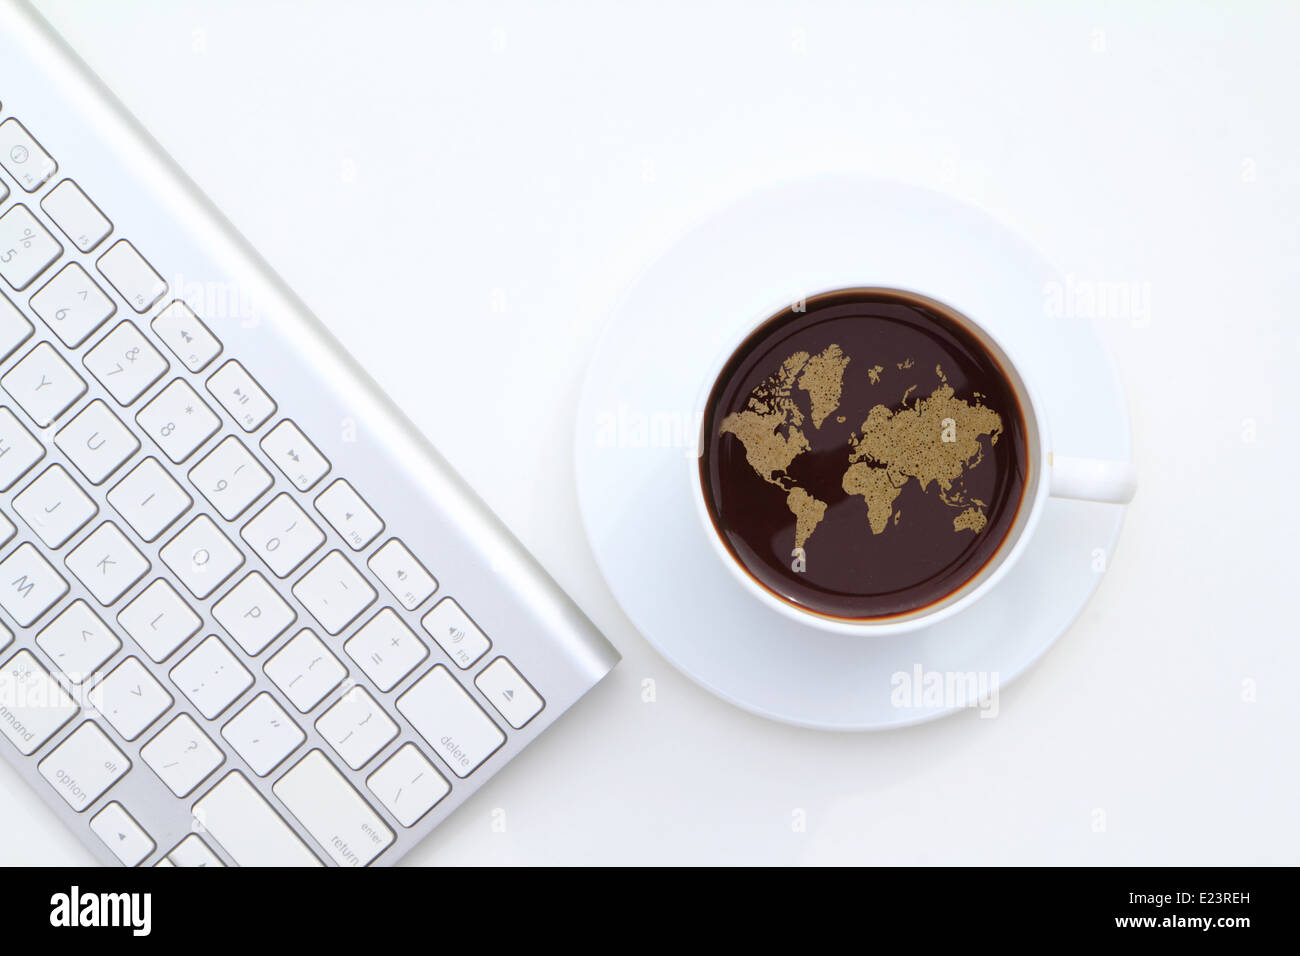 A cup of coffee with its foam formed into a world map presented on white background beside the computer keyboard Stock Photo